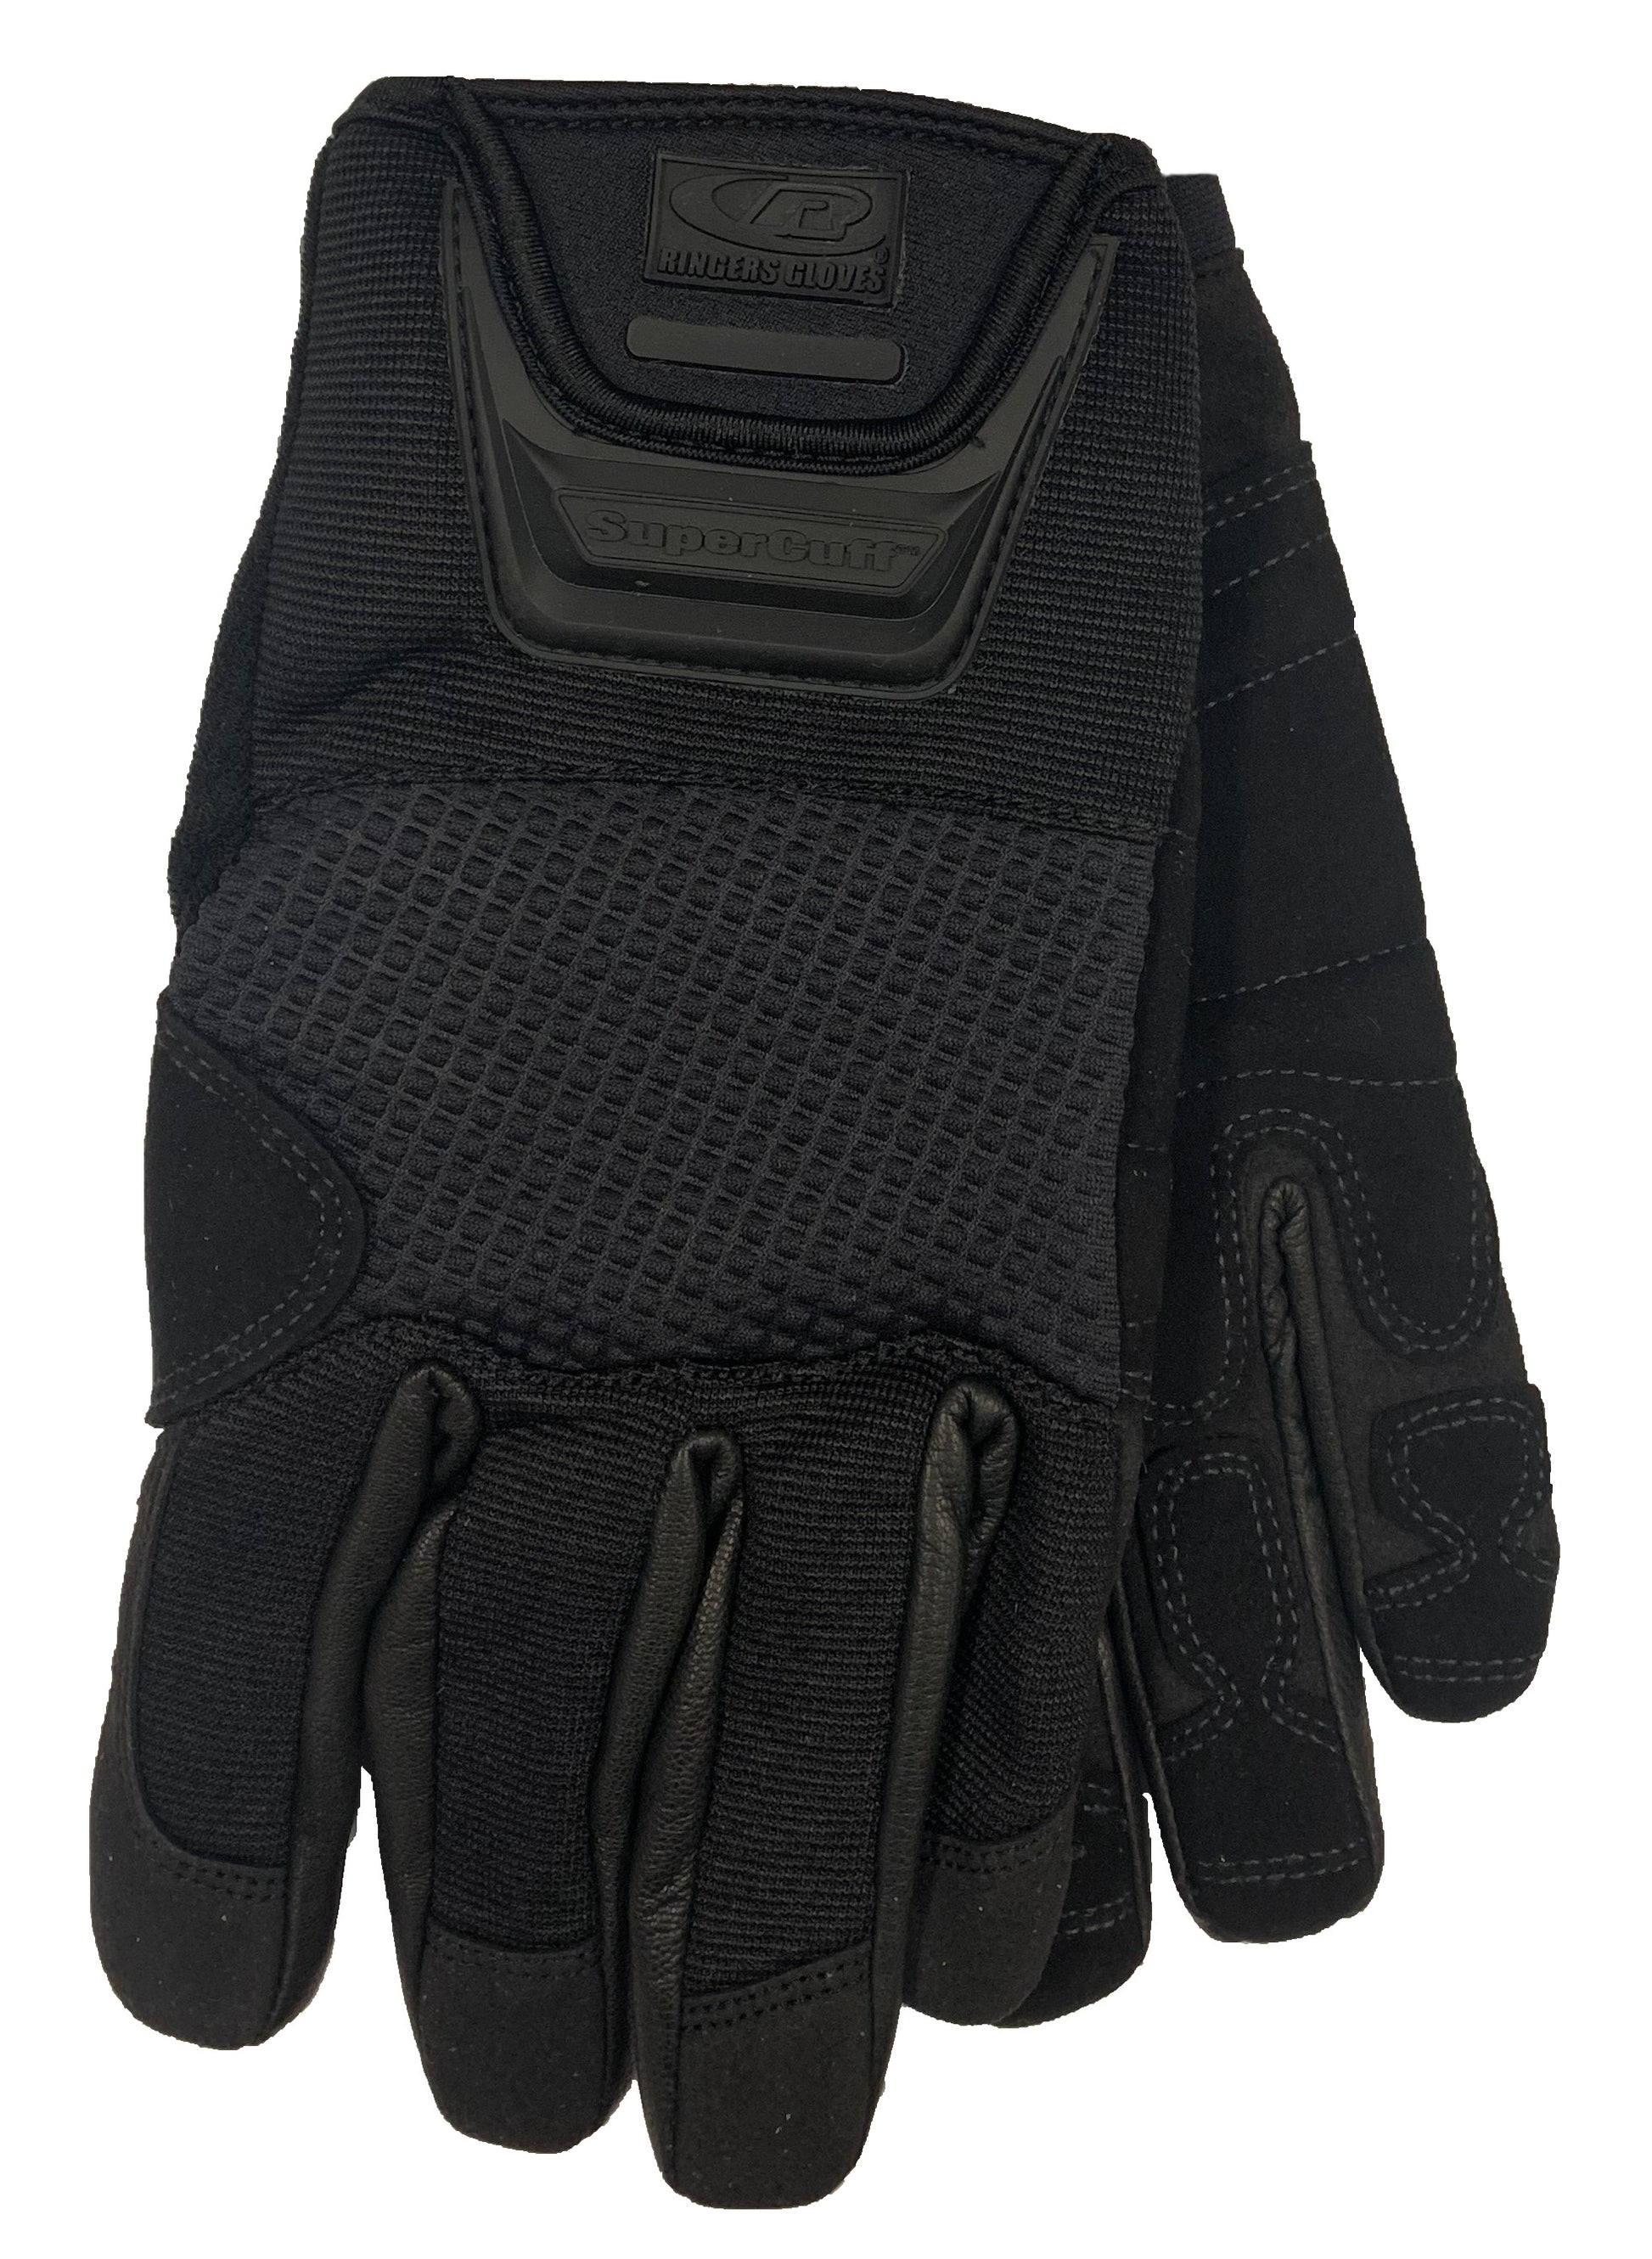 Ringers Gloves R-353 Rope Rescue Glove (Old Style), Black